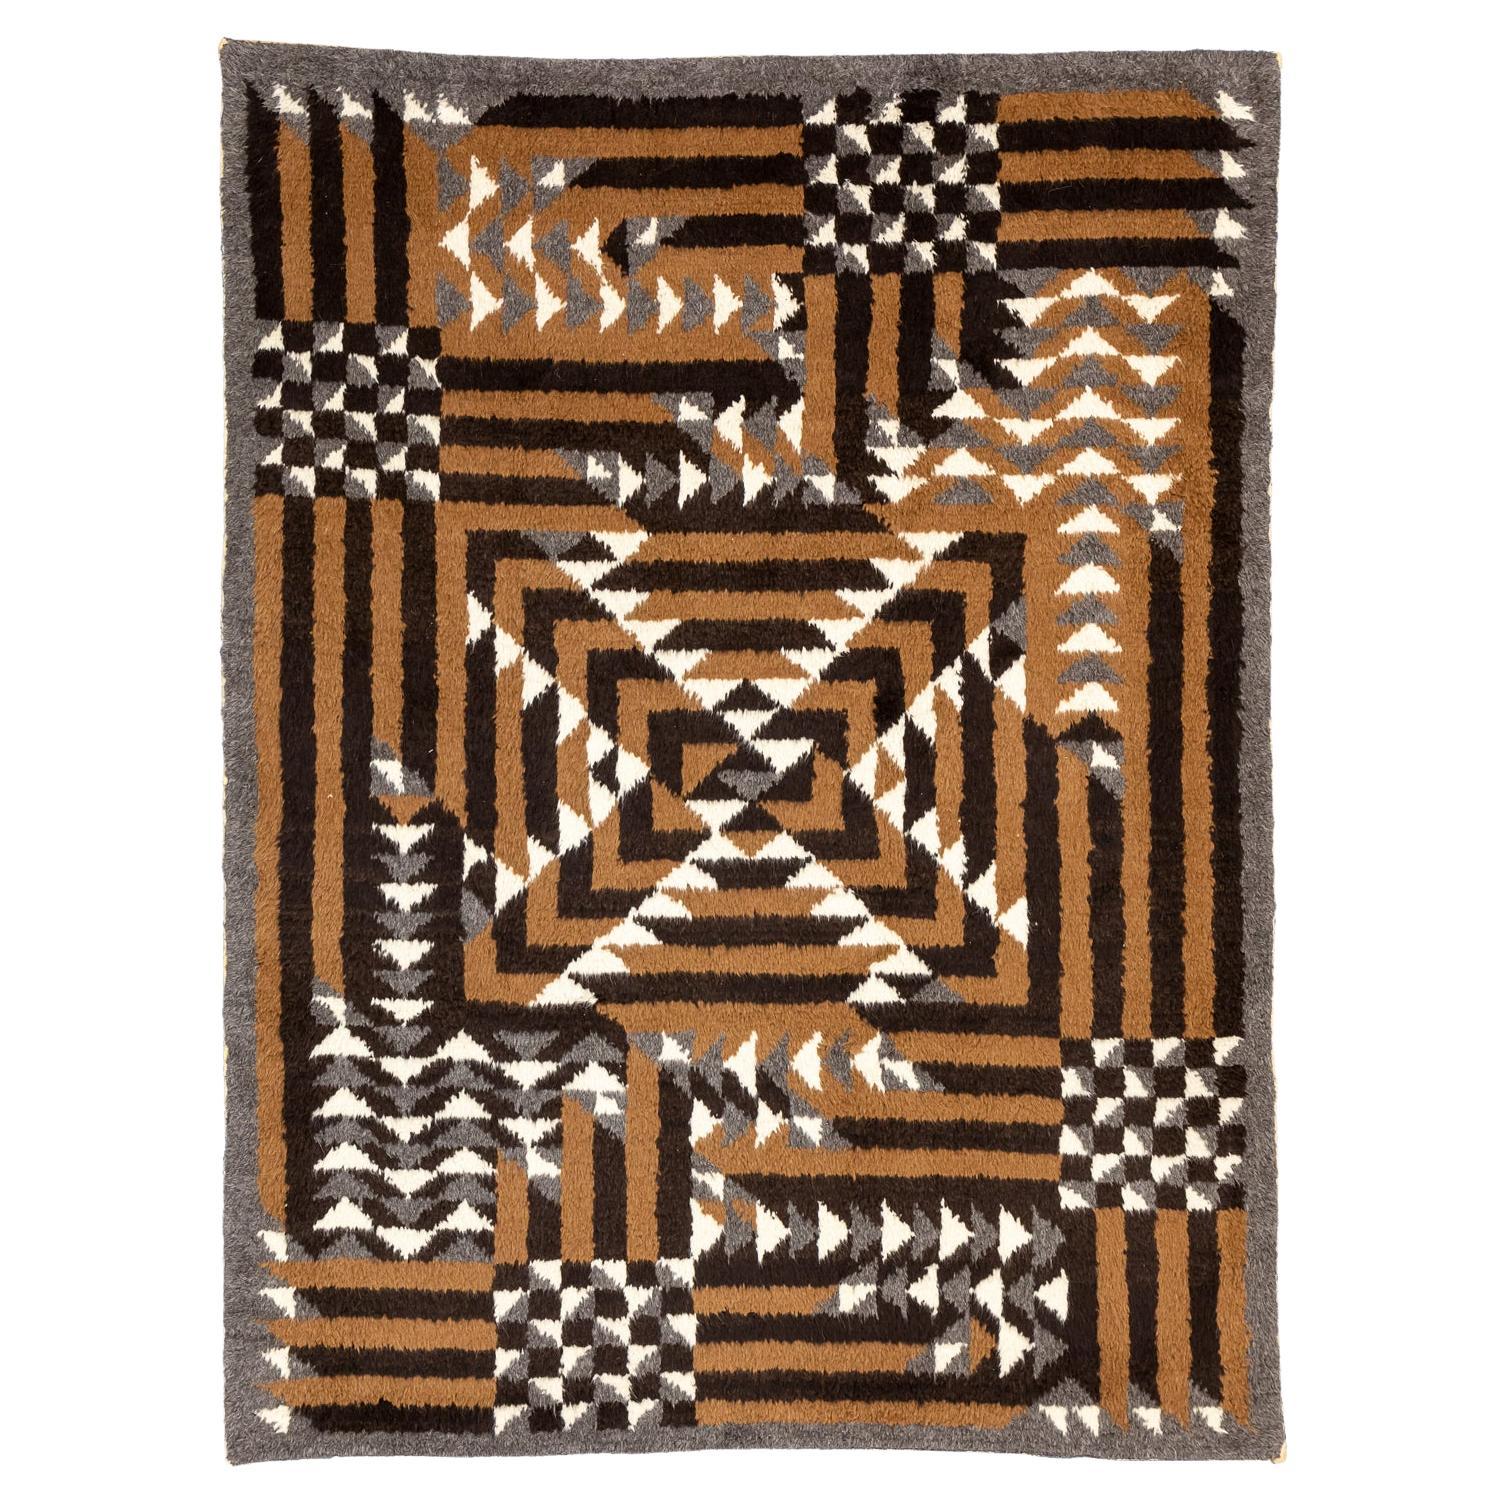 Art Deco European Rug with Checkerboard and Labyrinth Design, 1920-1950 For Sale